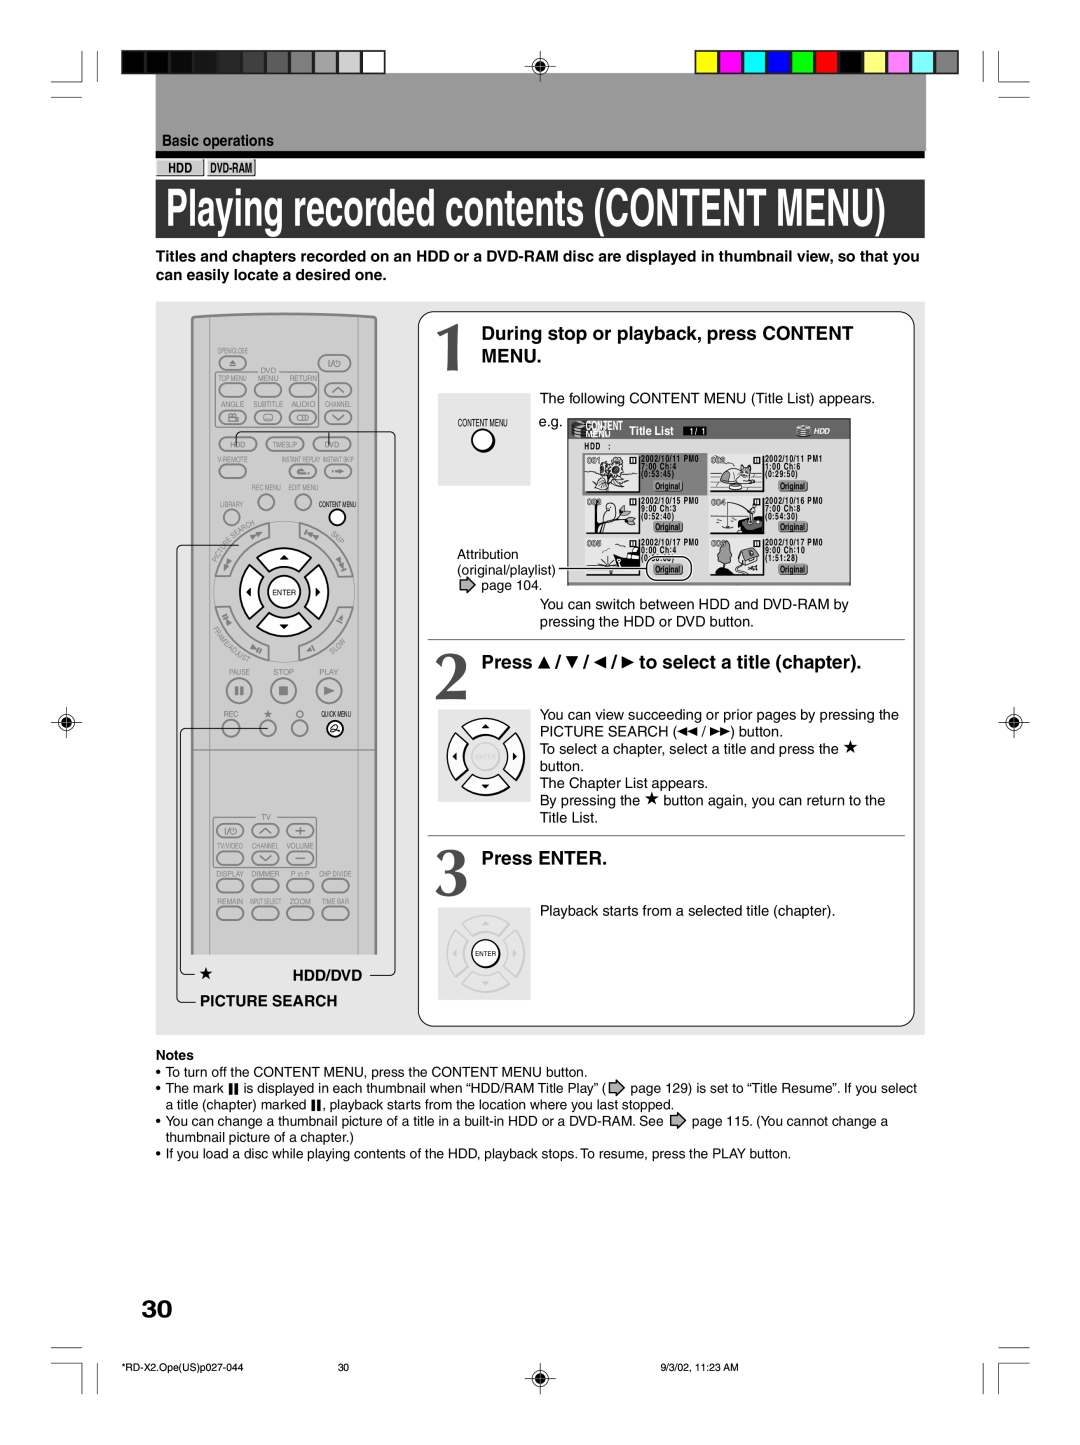 Toshiba RD-X2U owner manual During stop or playback, press CONTENT MENU, Press / / / to select a title chapter, Press ENTER 